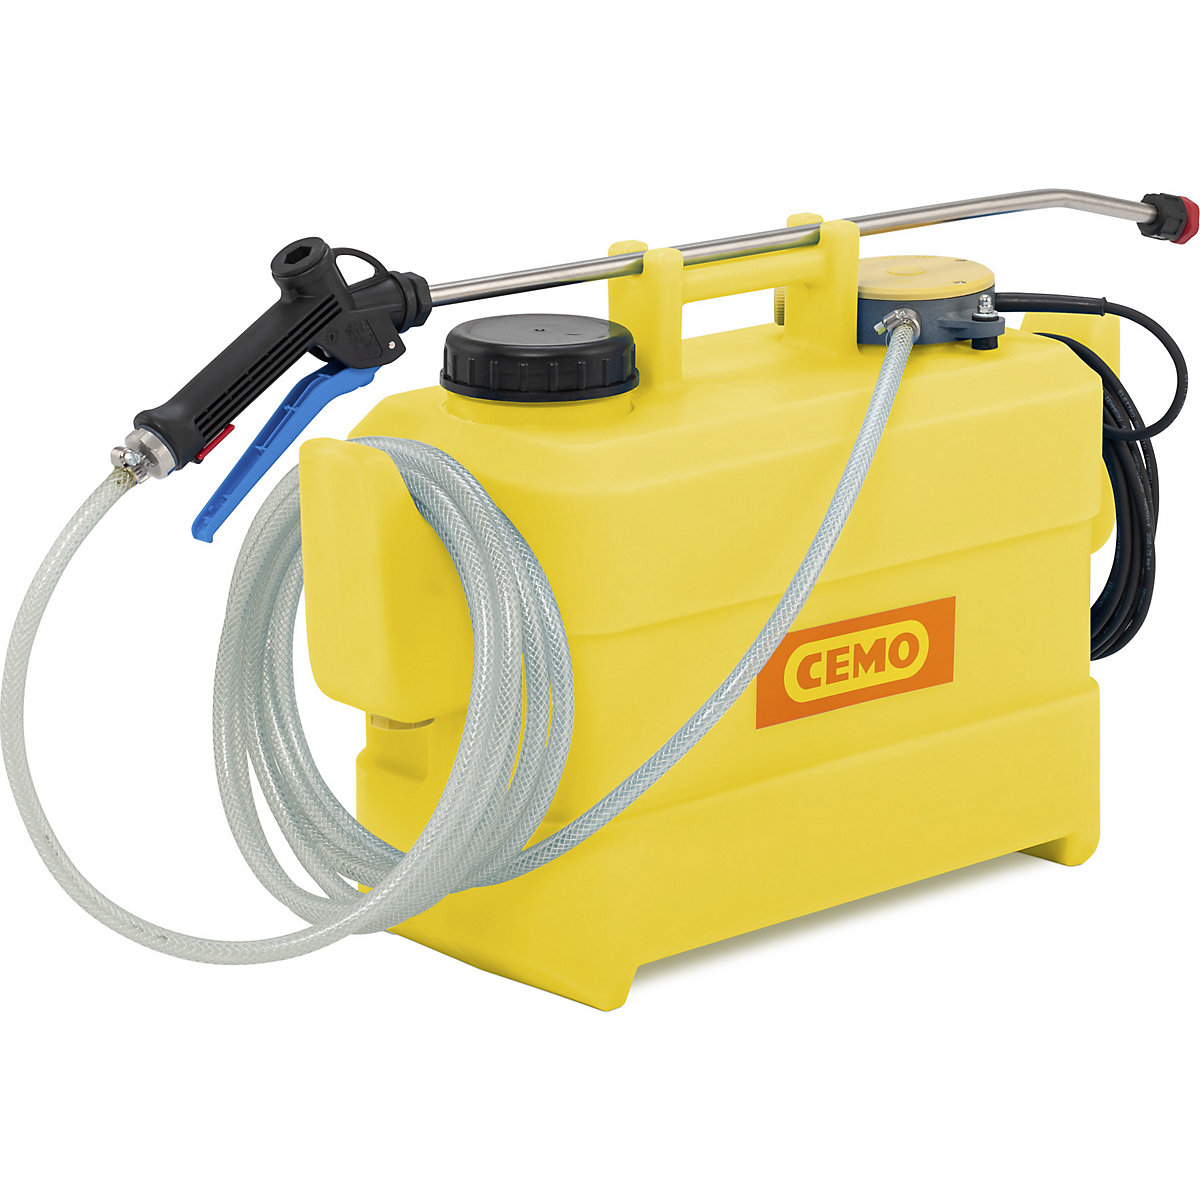 Electric sprayer with container for disinfectant solutions - CEMO